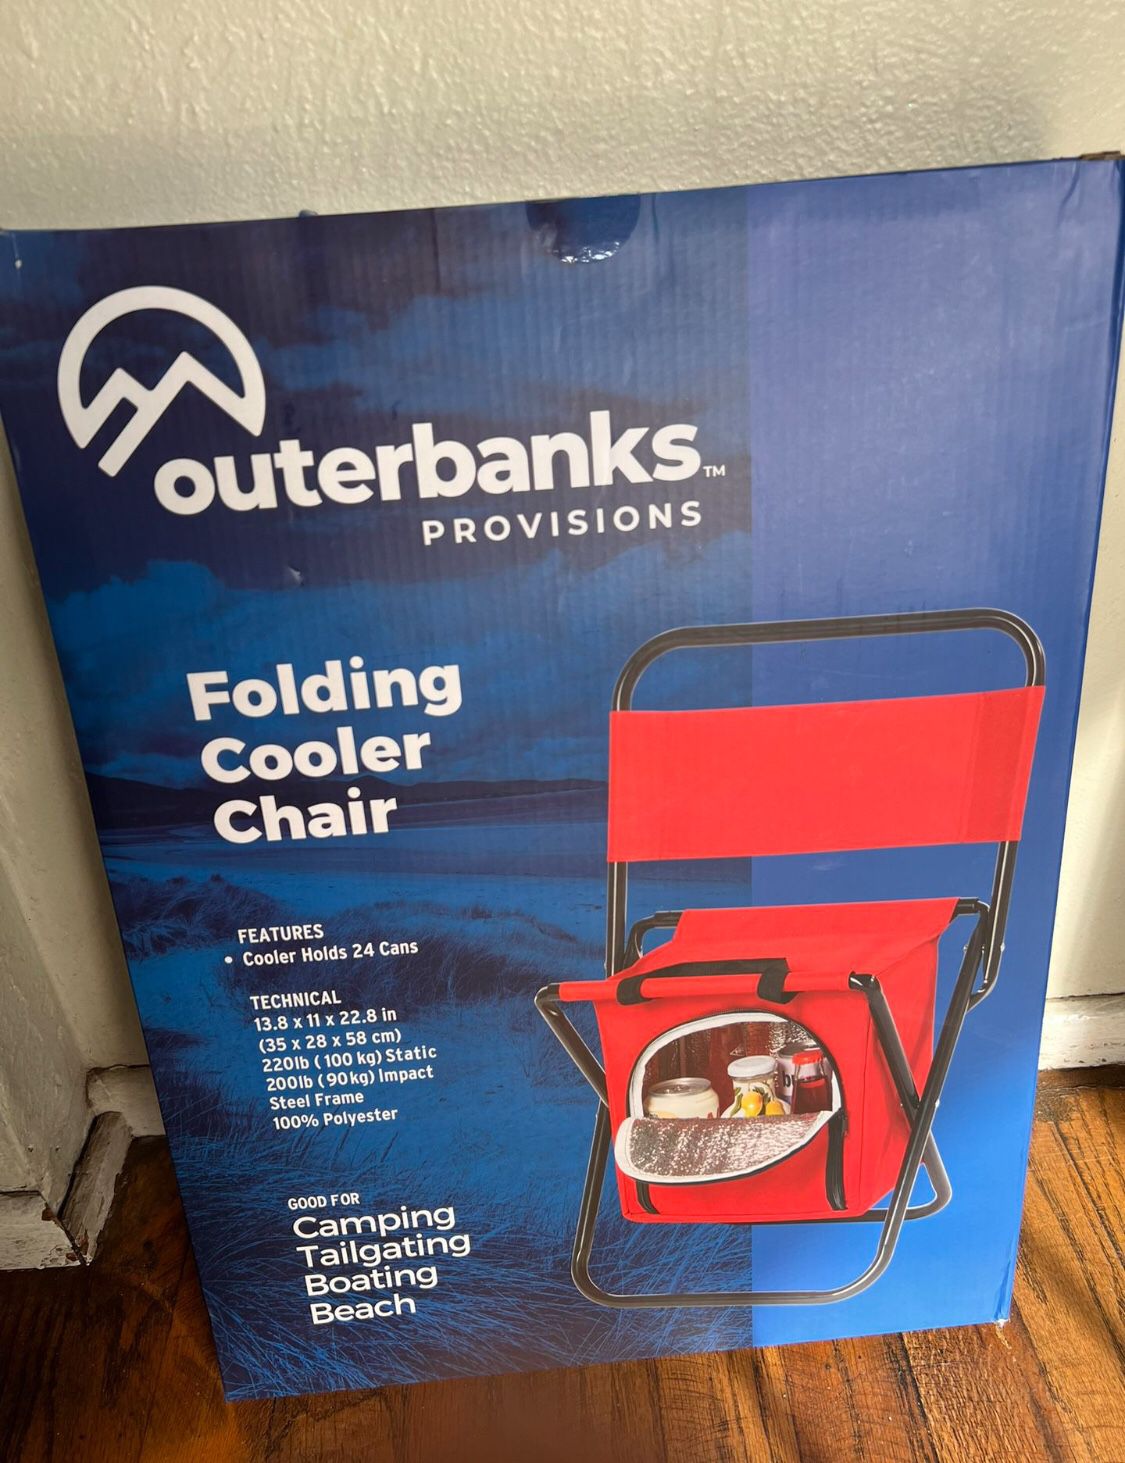 New Outerbanks Provisions Cooler Chair Ice Chest Camping Sports Events Chair